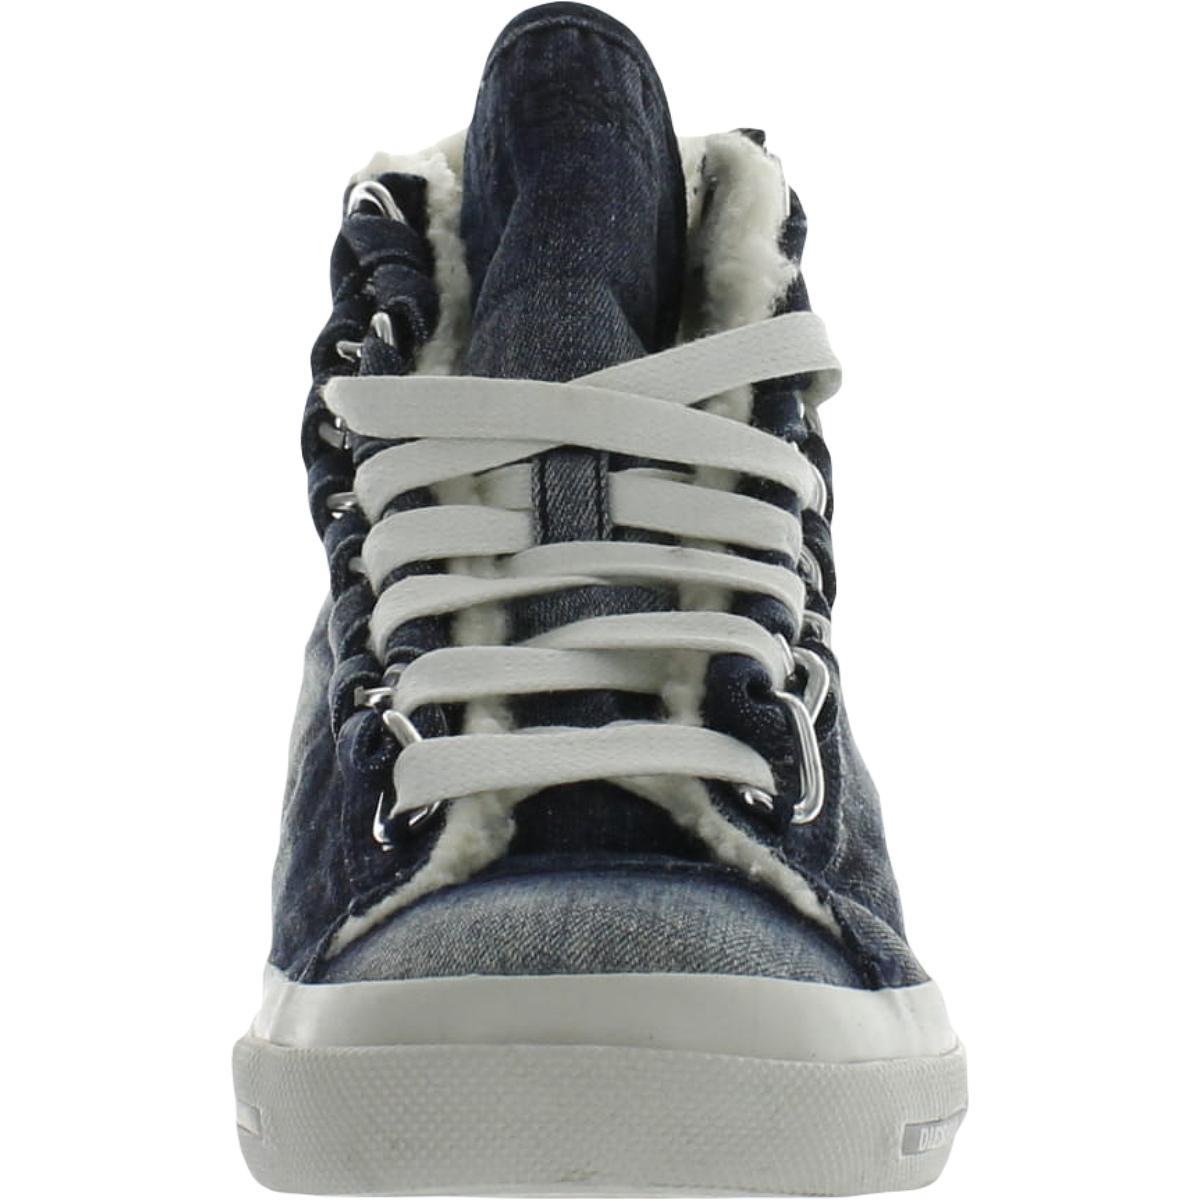 DIESEL Exposure Iv Faux Fur Denim Casual And Fashion Sneakers in Blue | Lyst